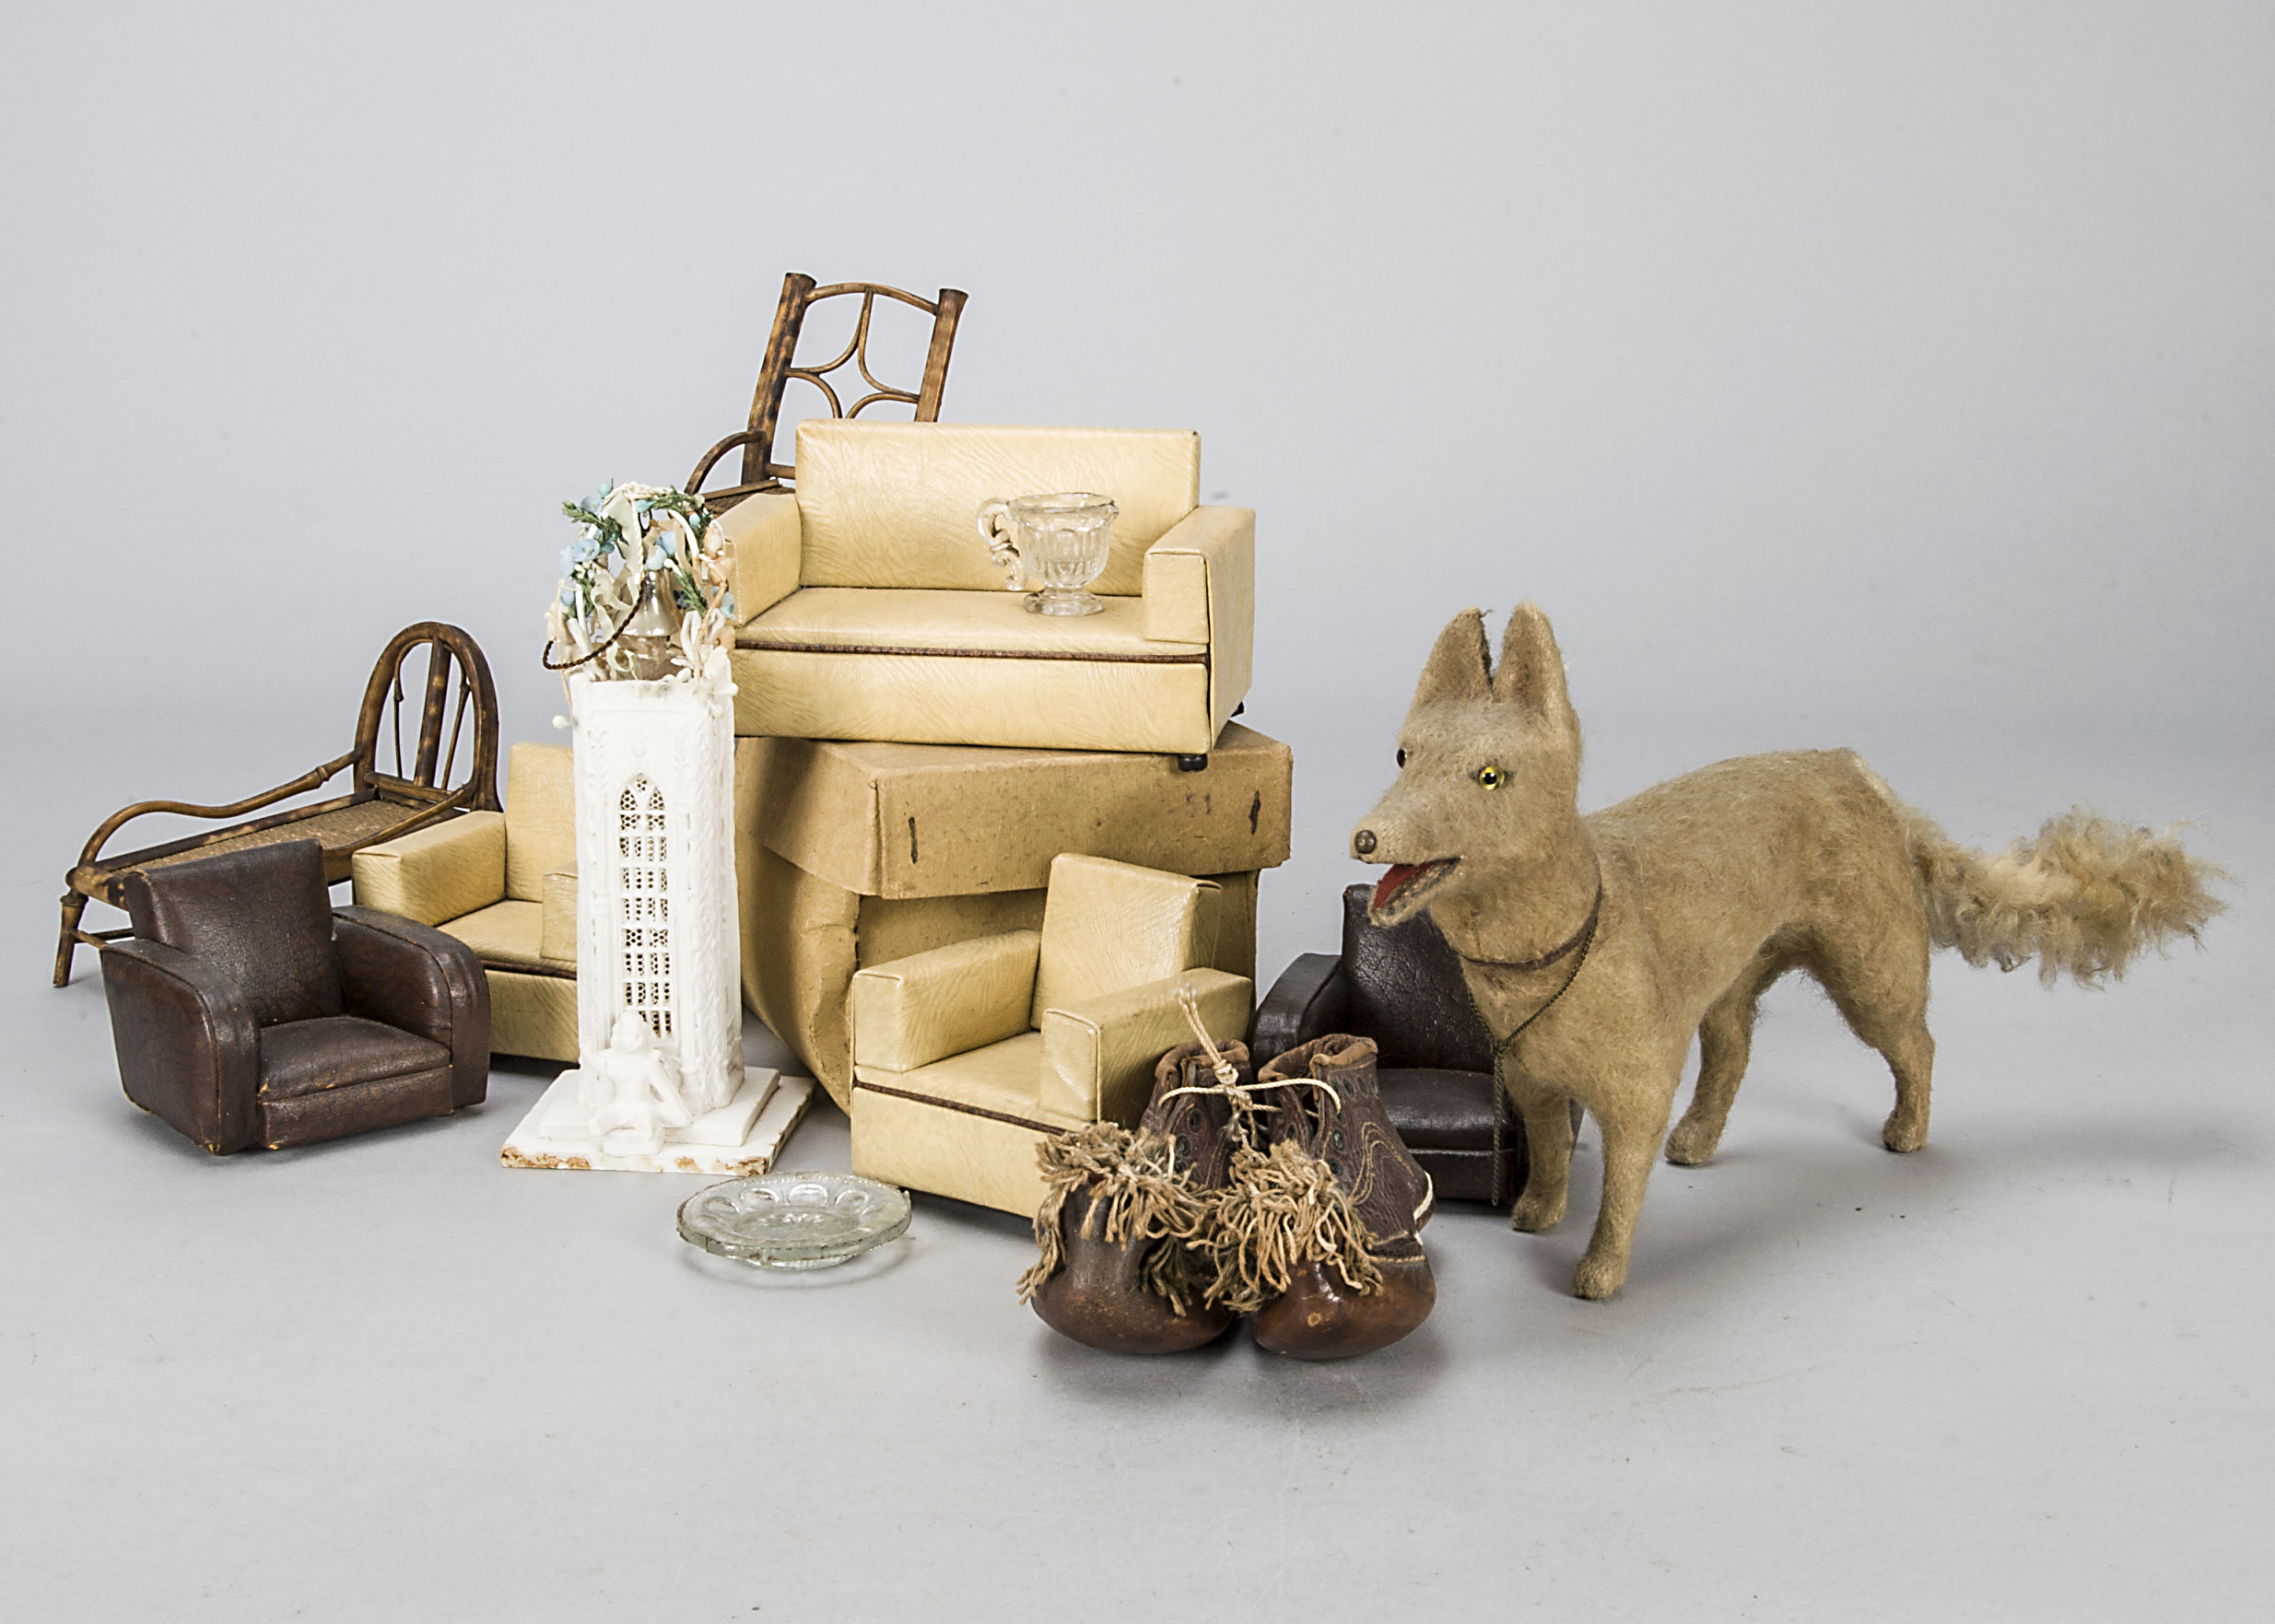 Various items, a German Shepherd or Wolf candy container 1920s, composition covered with light brown